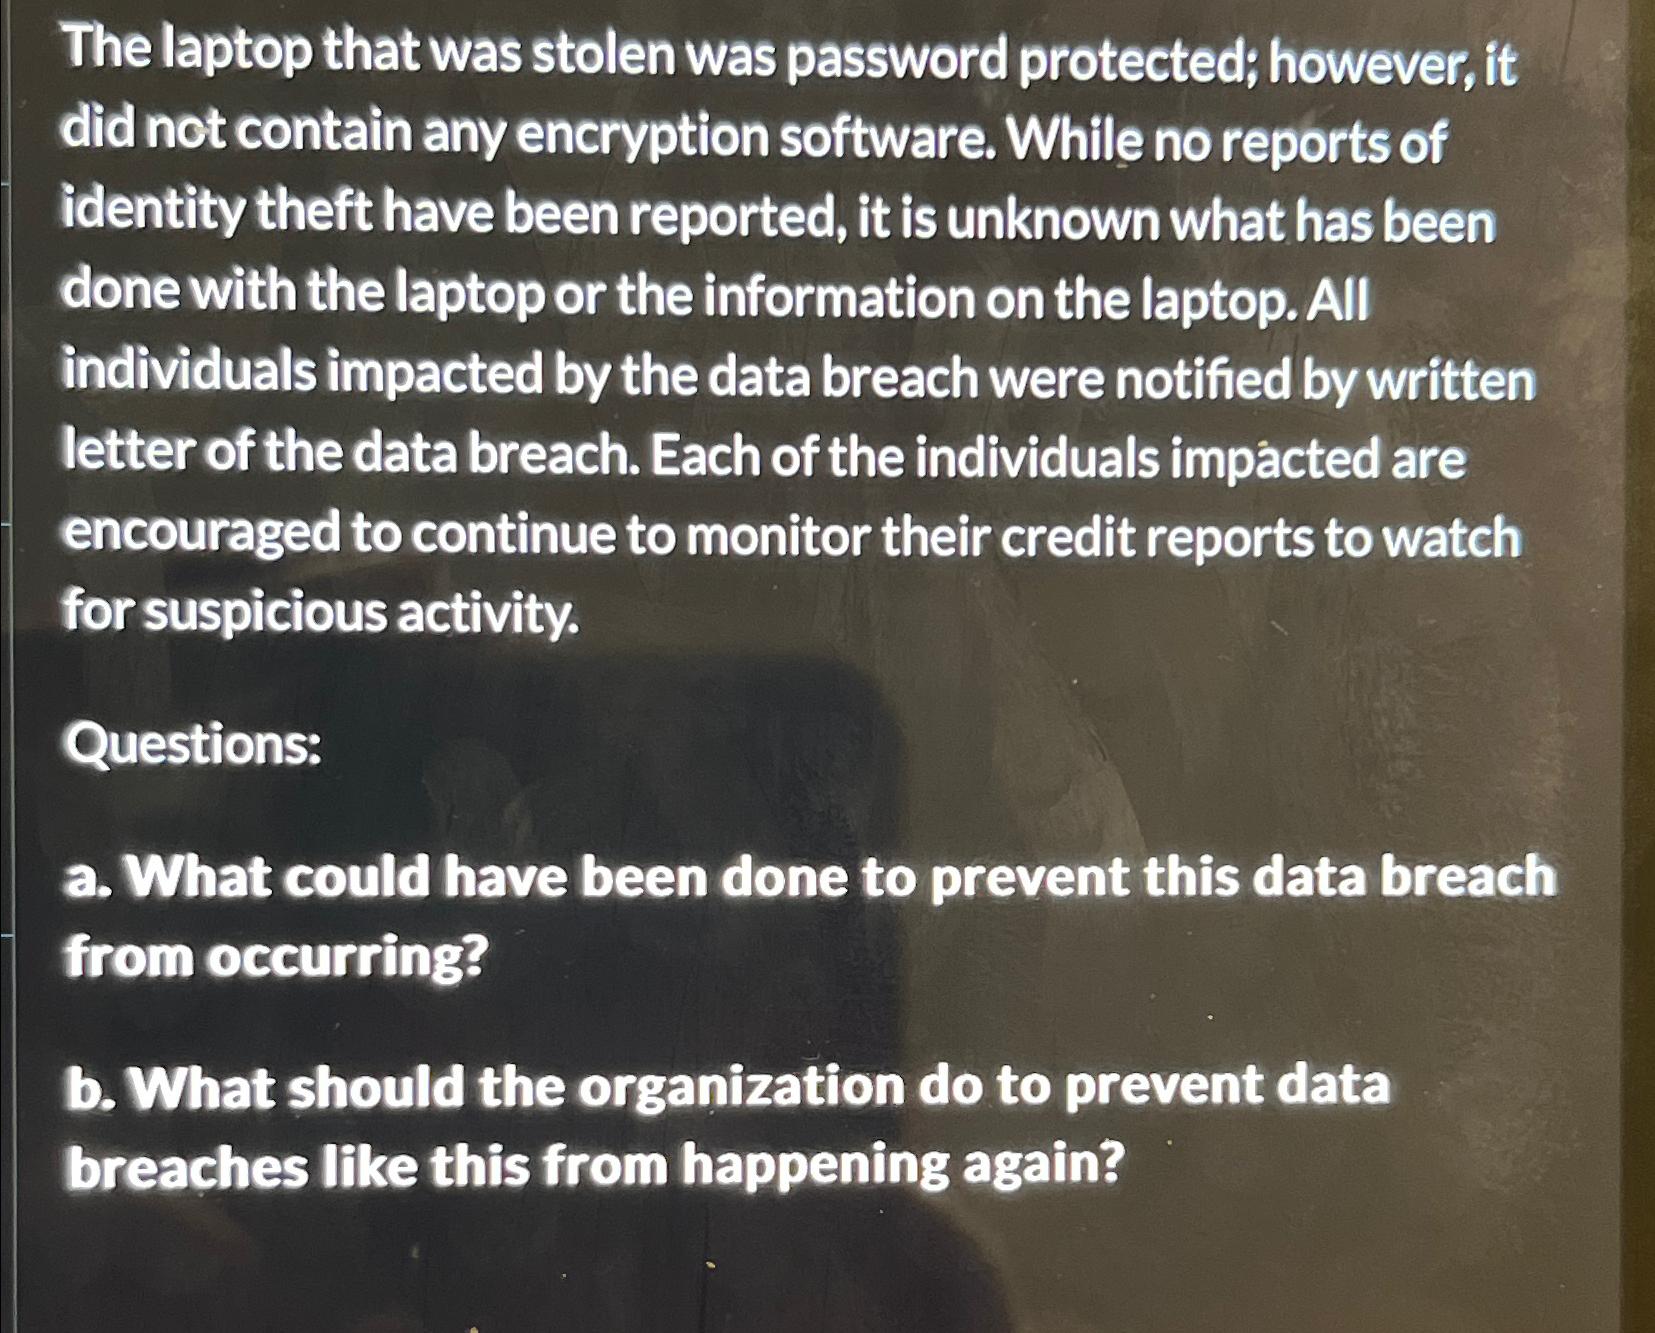 The laptop that was stolen was password protected; however, it did not contain any encryption software. While